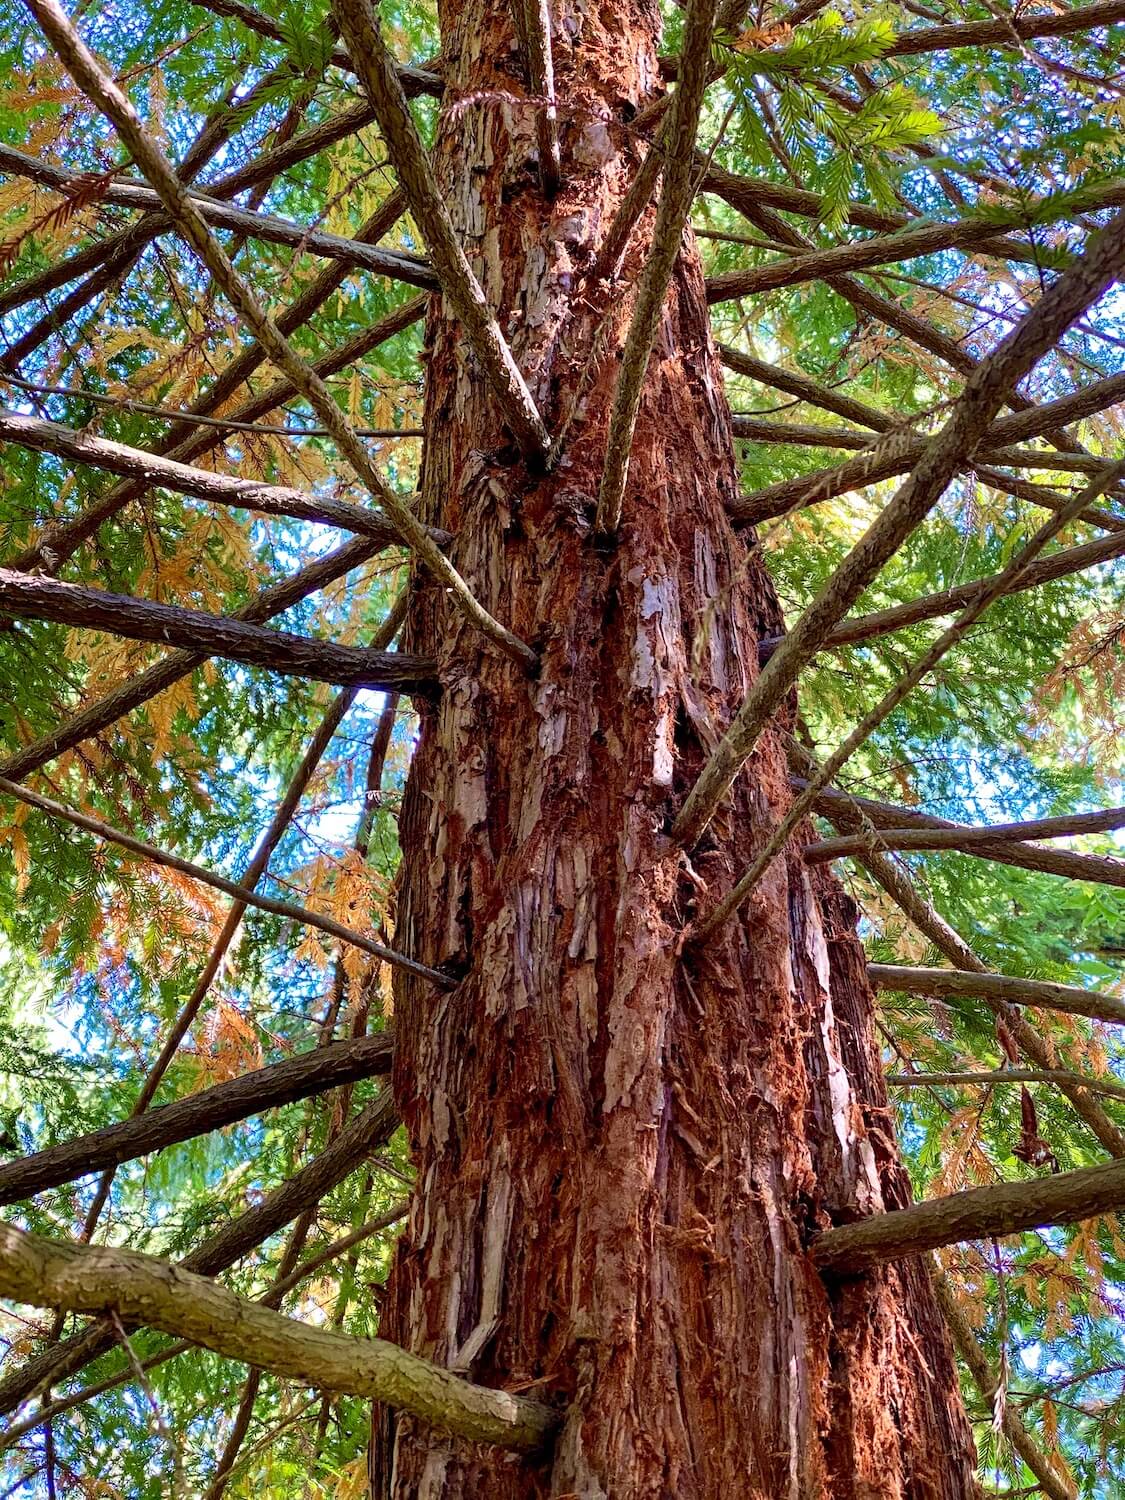 The red bark of a California Redwood is up close with branches driving out in every direction. The leaves are a mixture of green and orange shedding colors with blue sky in the background. Seattle has many gardens with lovely trees like this and Kruckeberg Botanic Garden is iconic in the Seattle area.